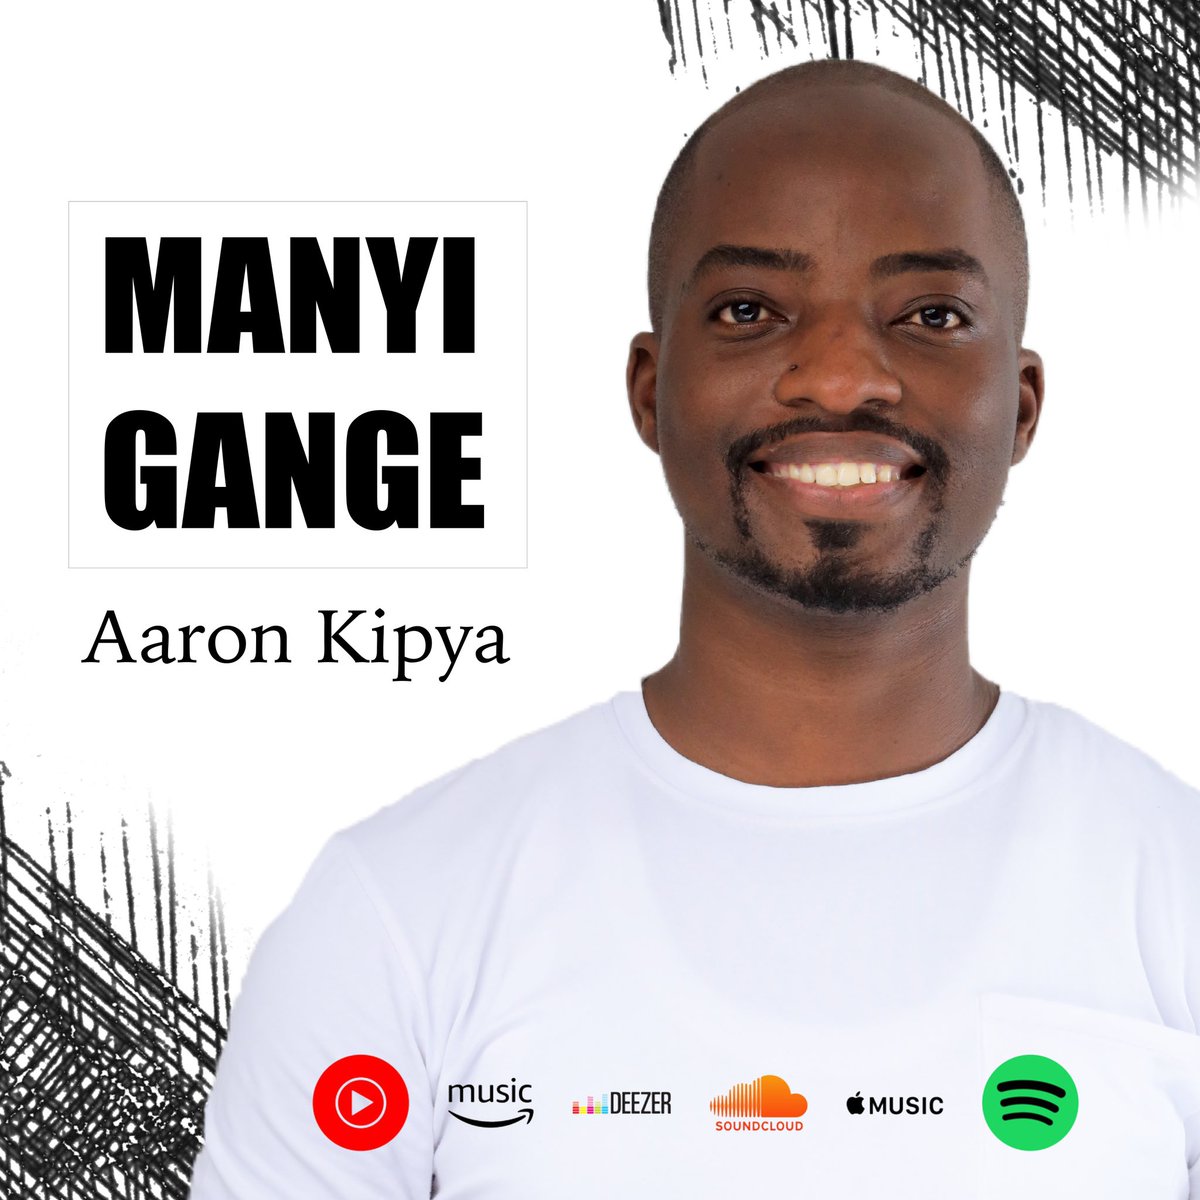 My friend @AaronKipya1 has a song out today. I am excited